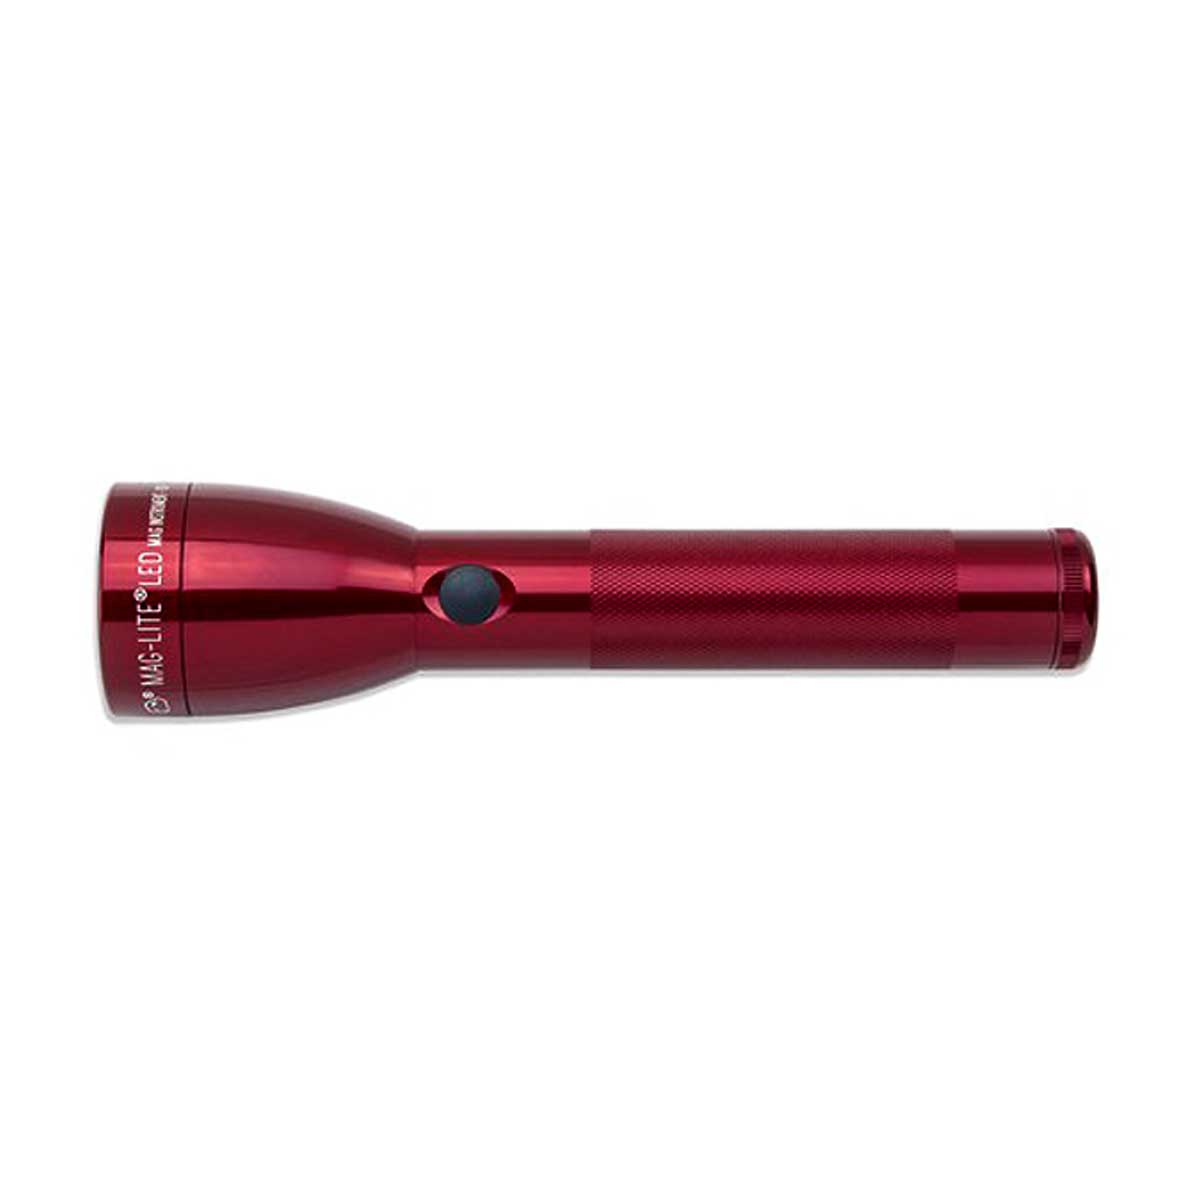 2 Cell C Maglite LED Flashlight (Red)